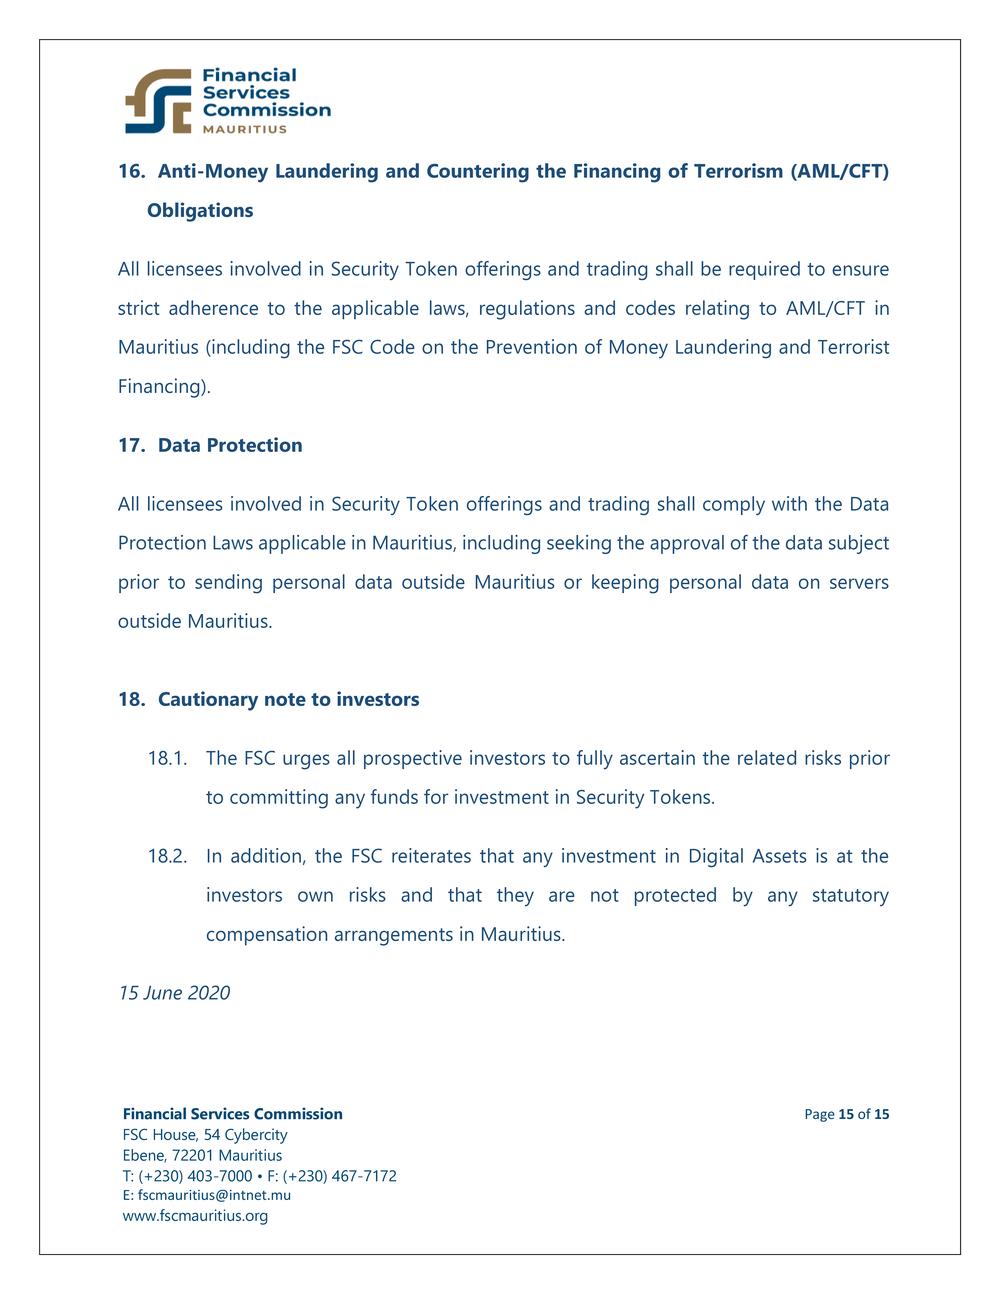 FSC Guidance Notes - Security Token Offerings and Security Token Trading Systems